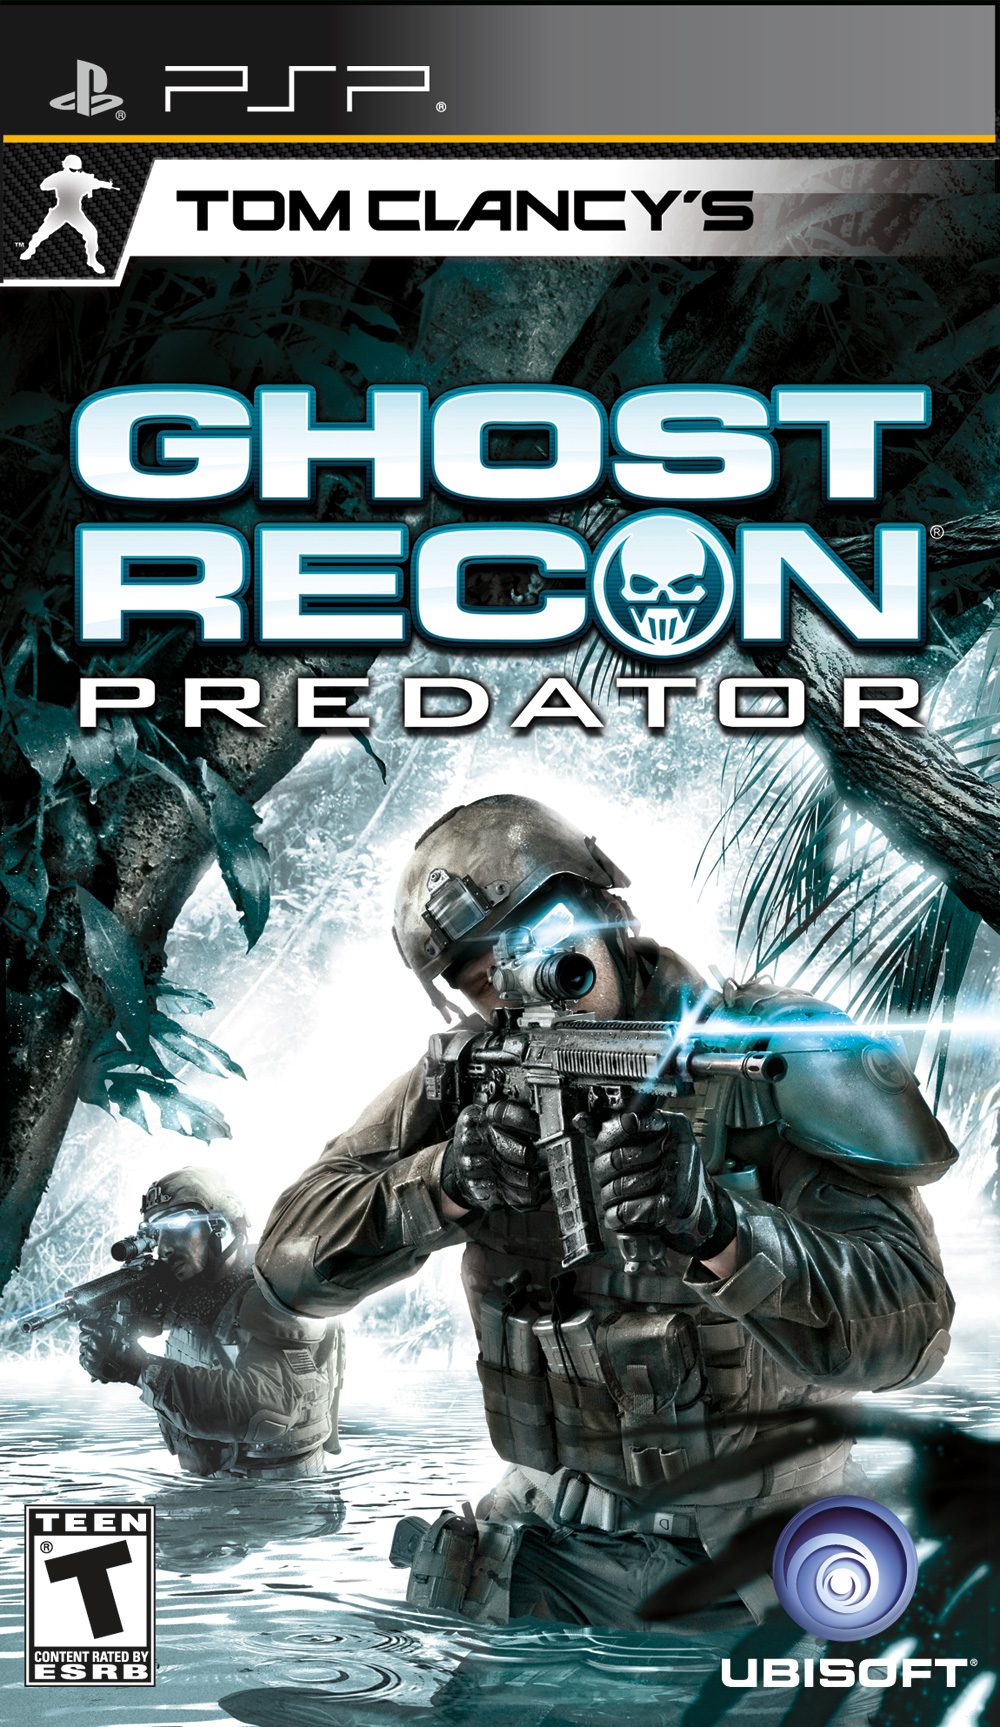 tom clancy ghost recon rating